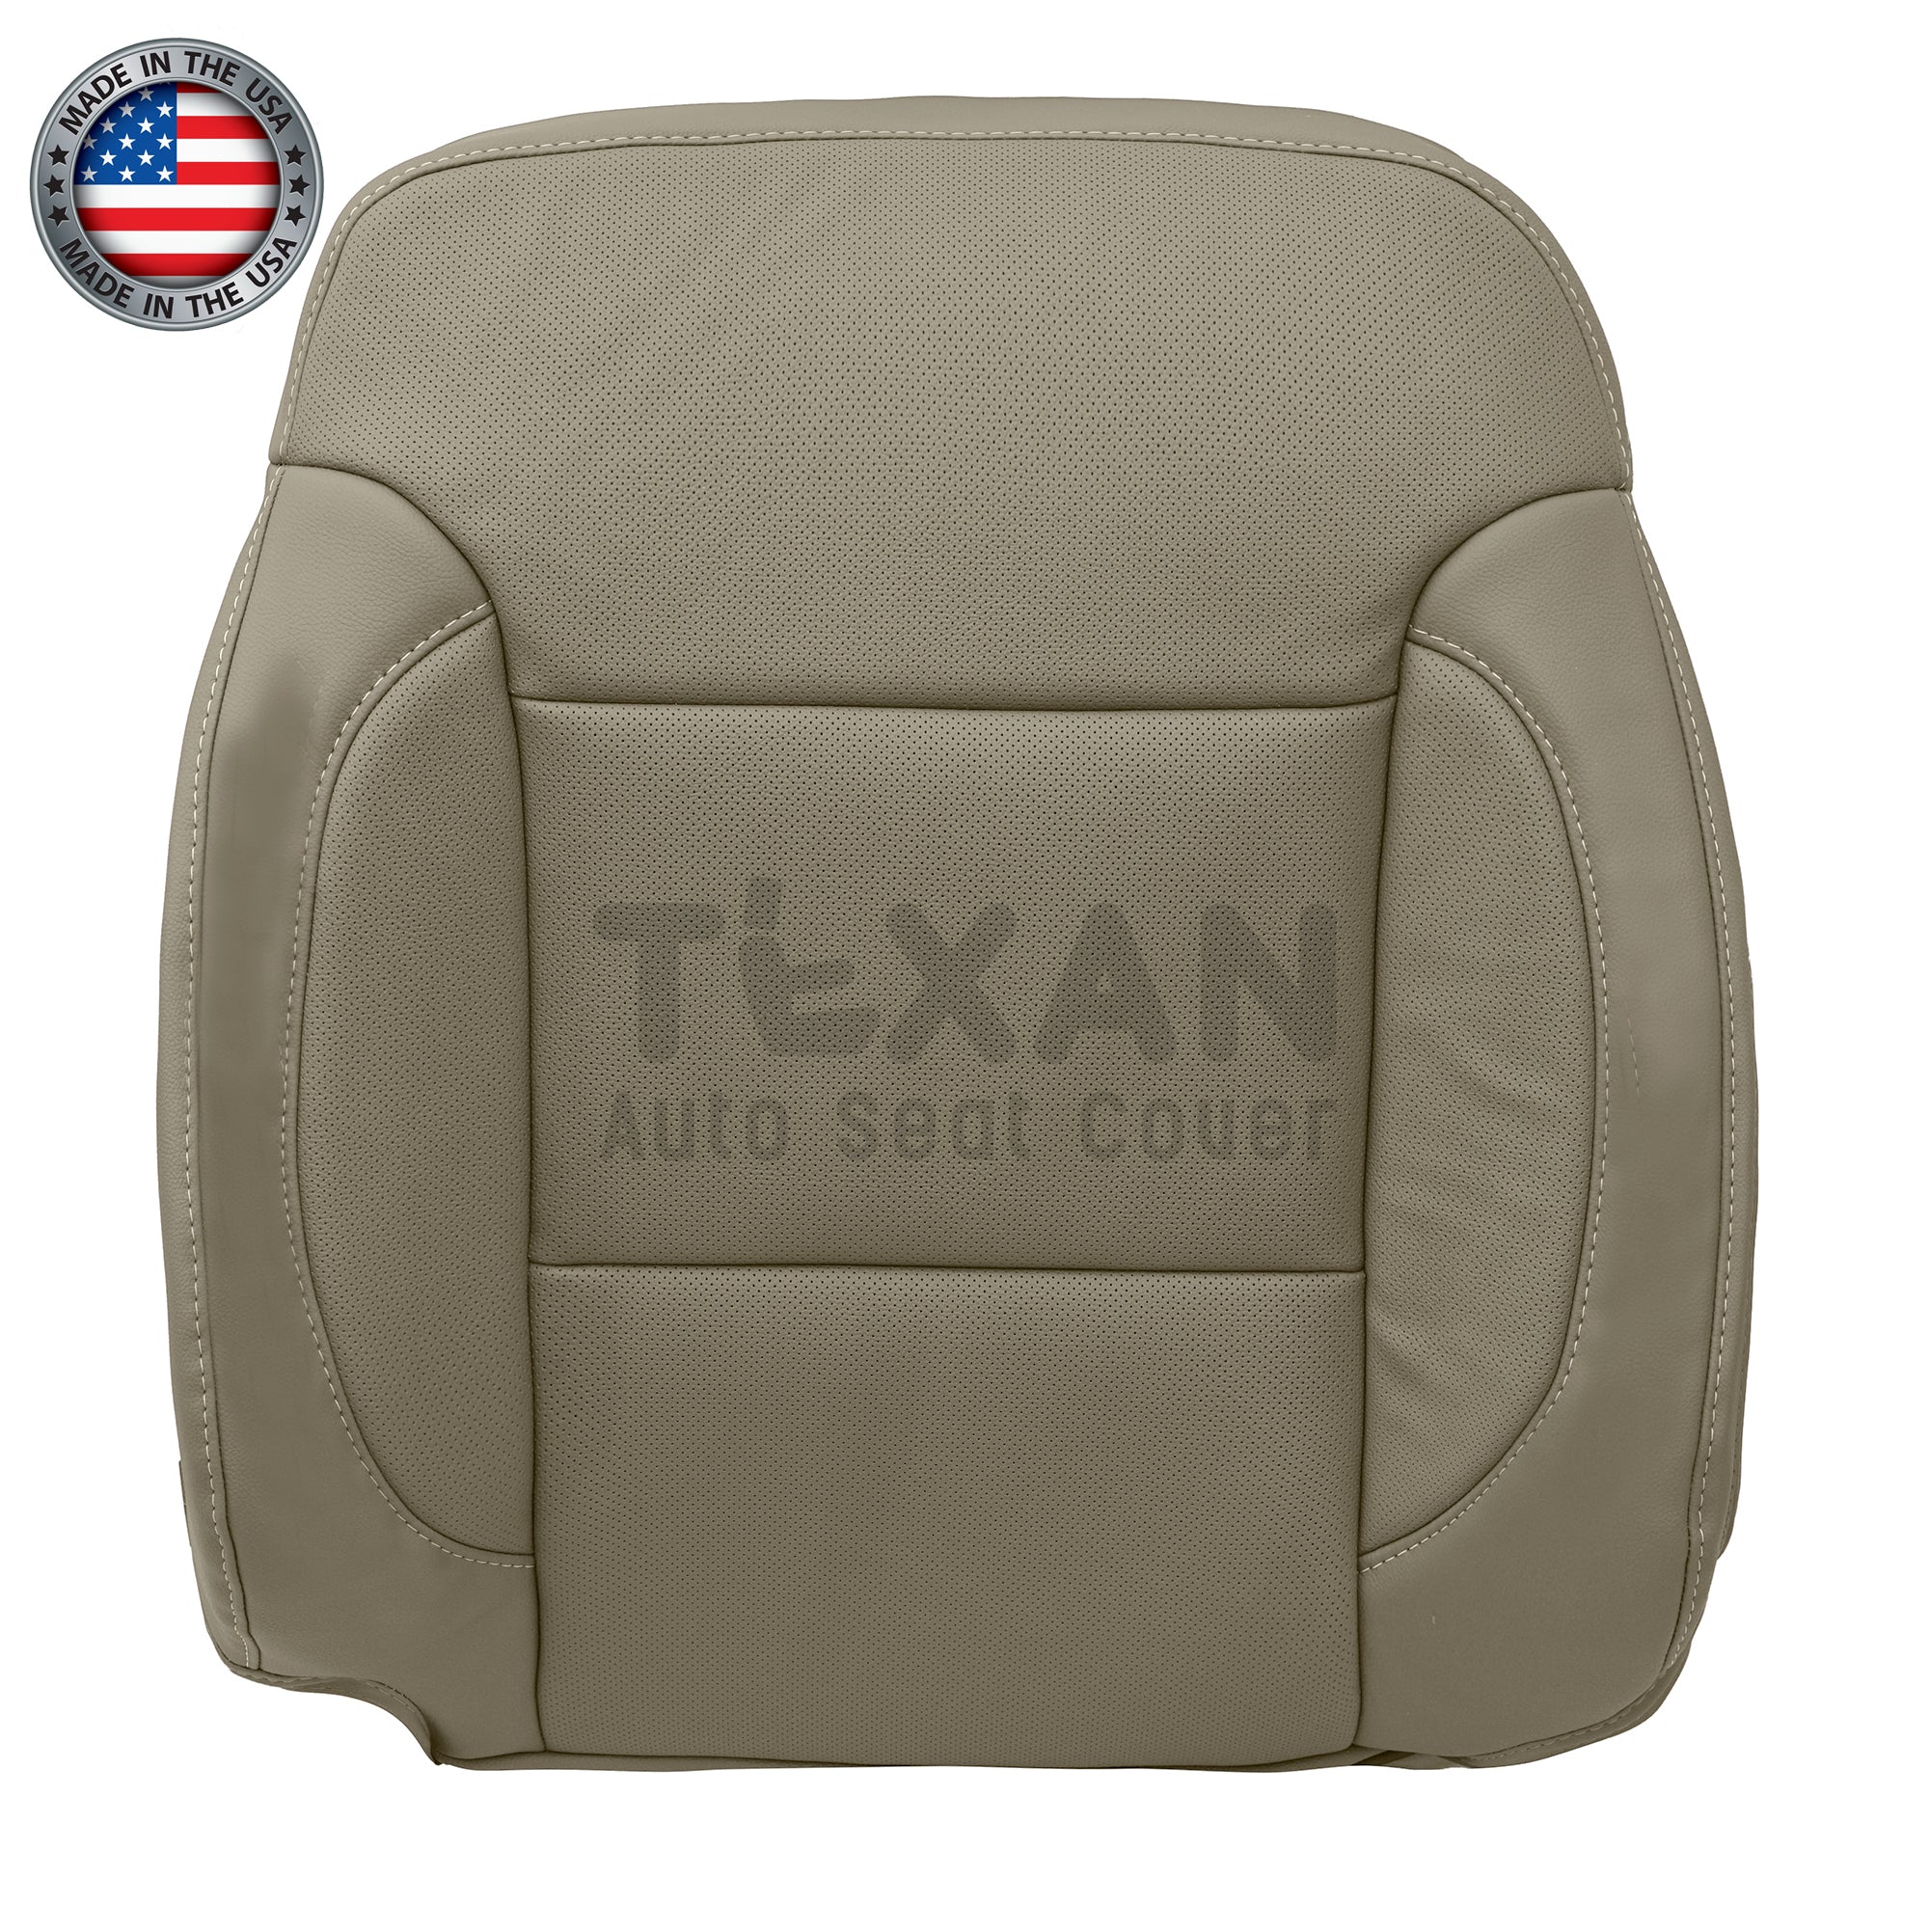 For 2014, 2015, 2016, 2017, 2018, 2019 Chevy Silverado Driver Side Lean Back Perforated Leather Replacement Seat Cover Dune Tan